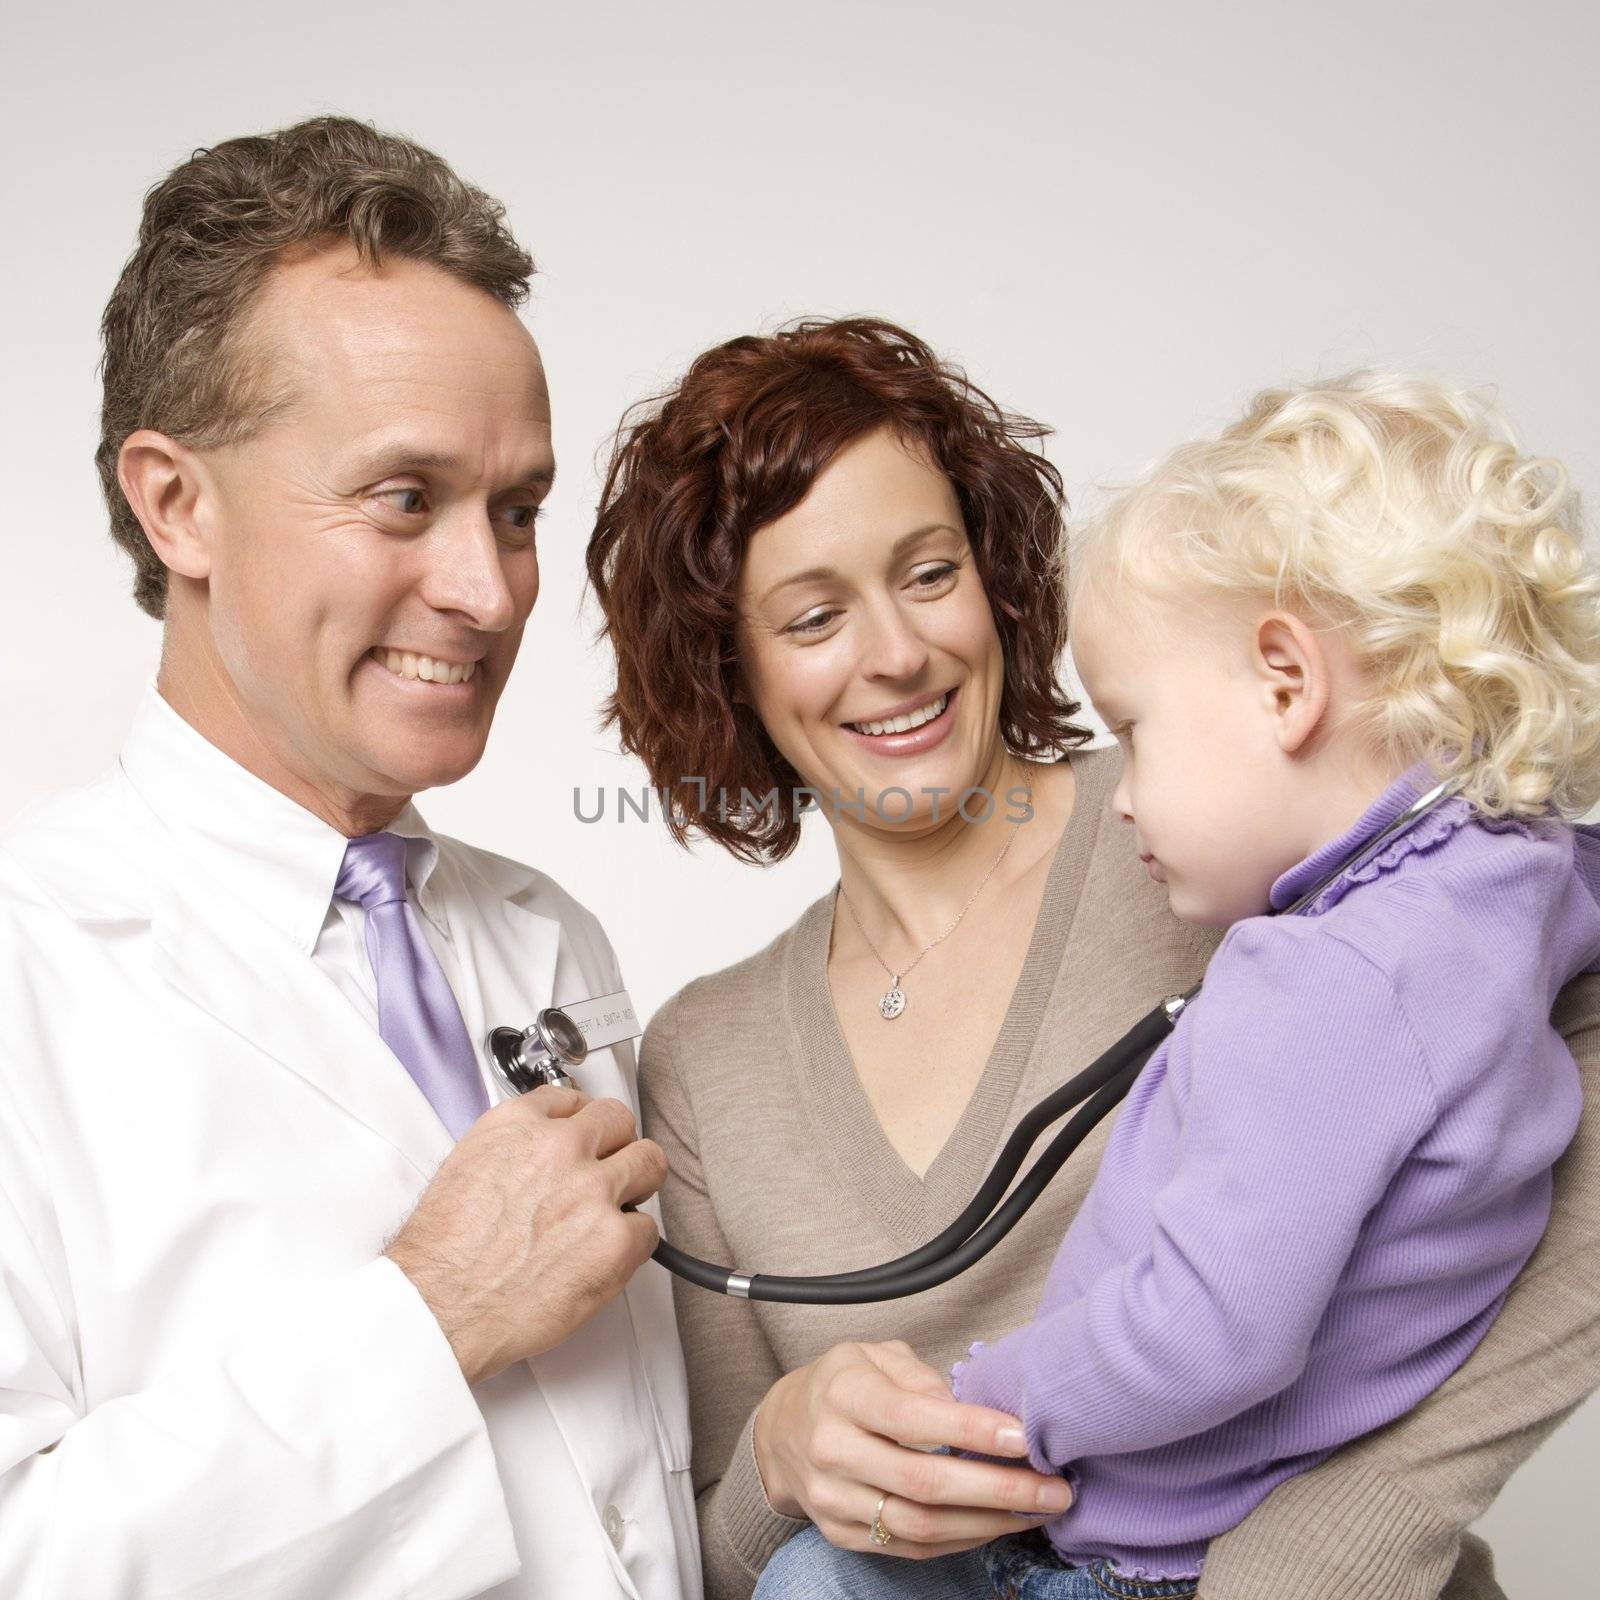 Physician amusing child. by iofoto